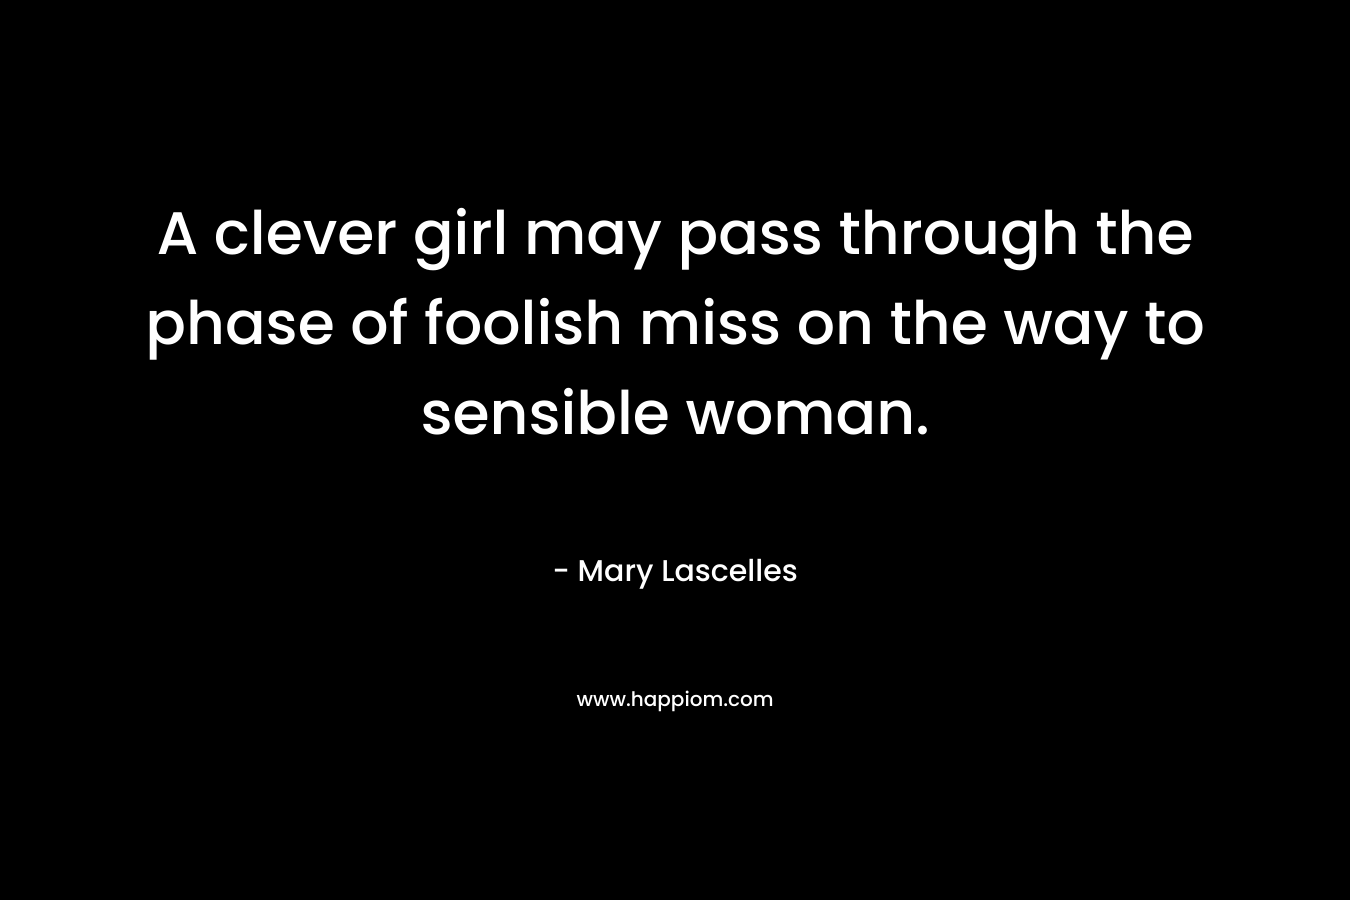 A clever girl may pass through the phase of foolish miss on the way to sensible woman. – Mary Lascelles